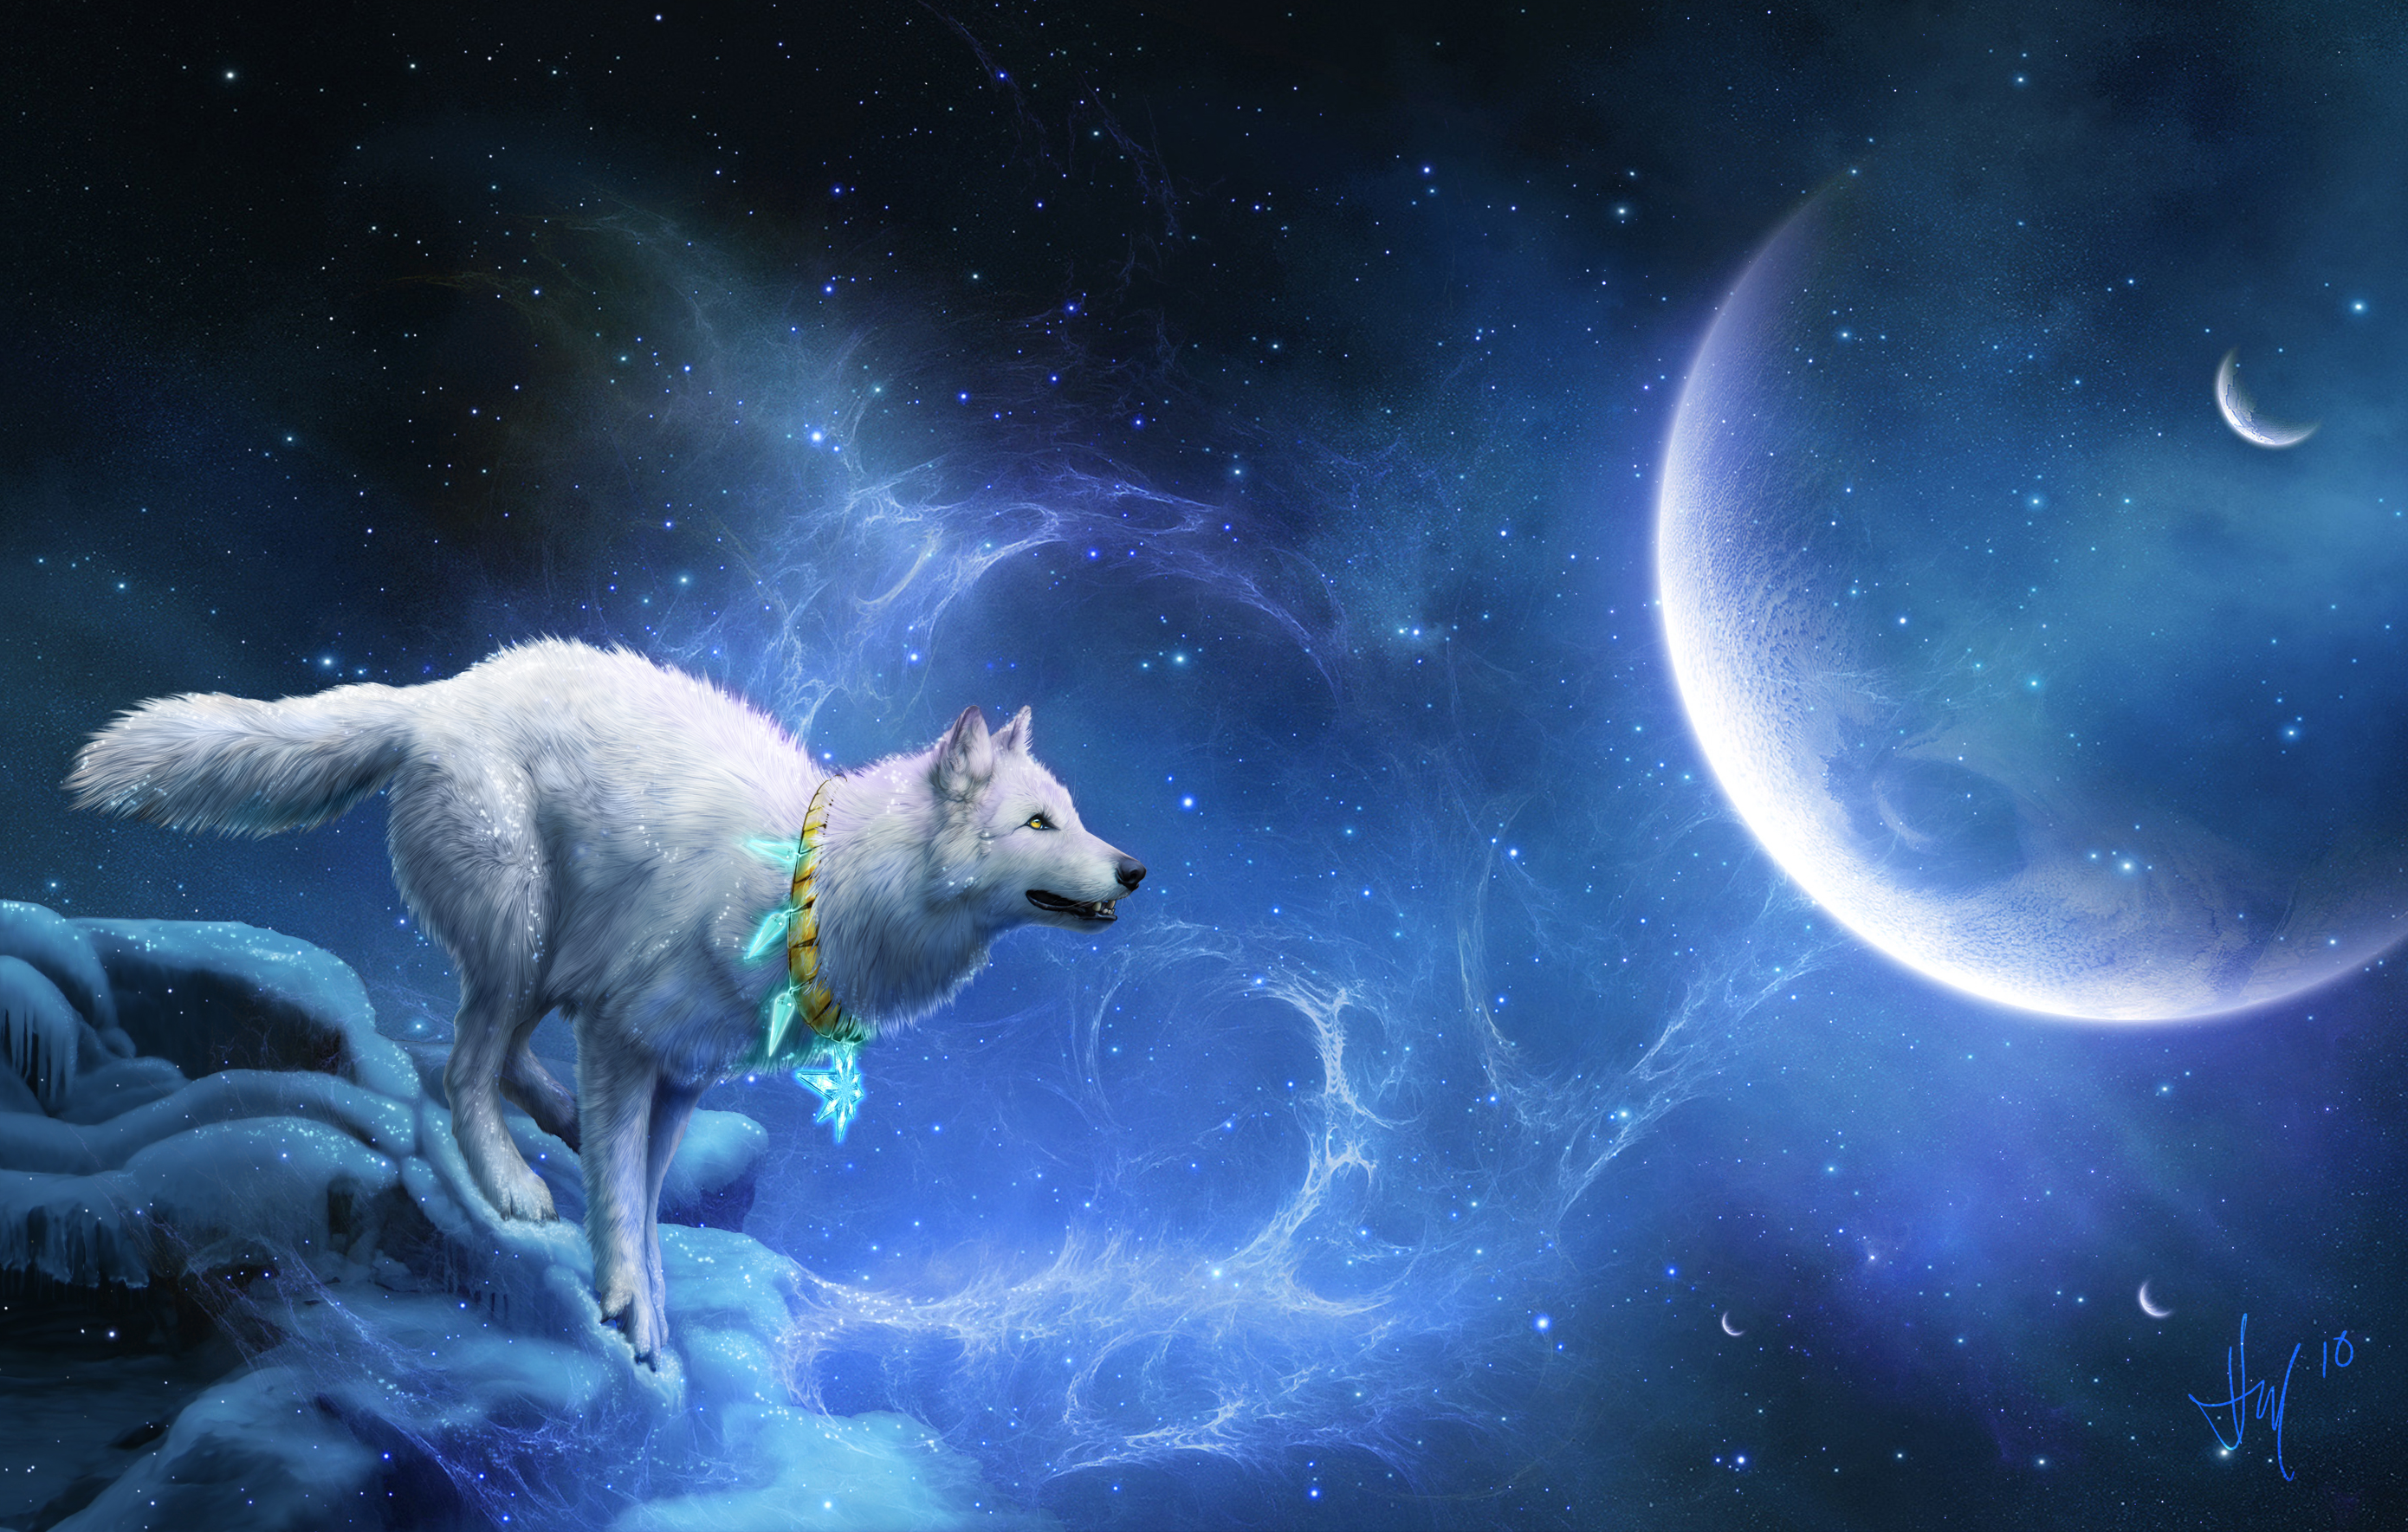 Wolf Fantasy in Blue by Heather Meuser